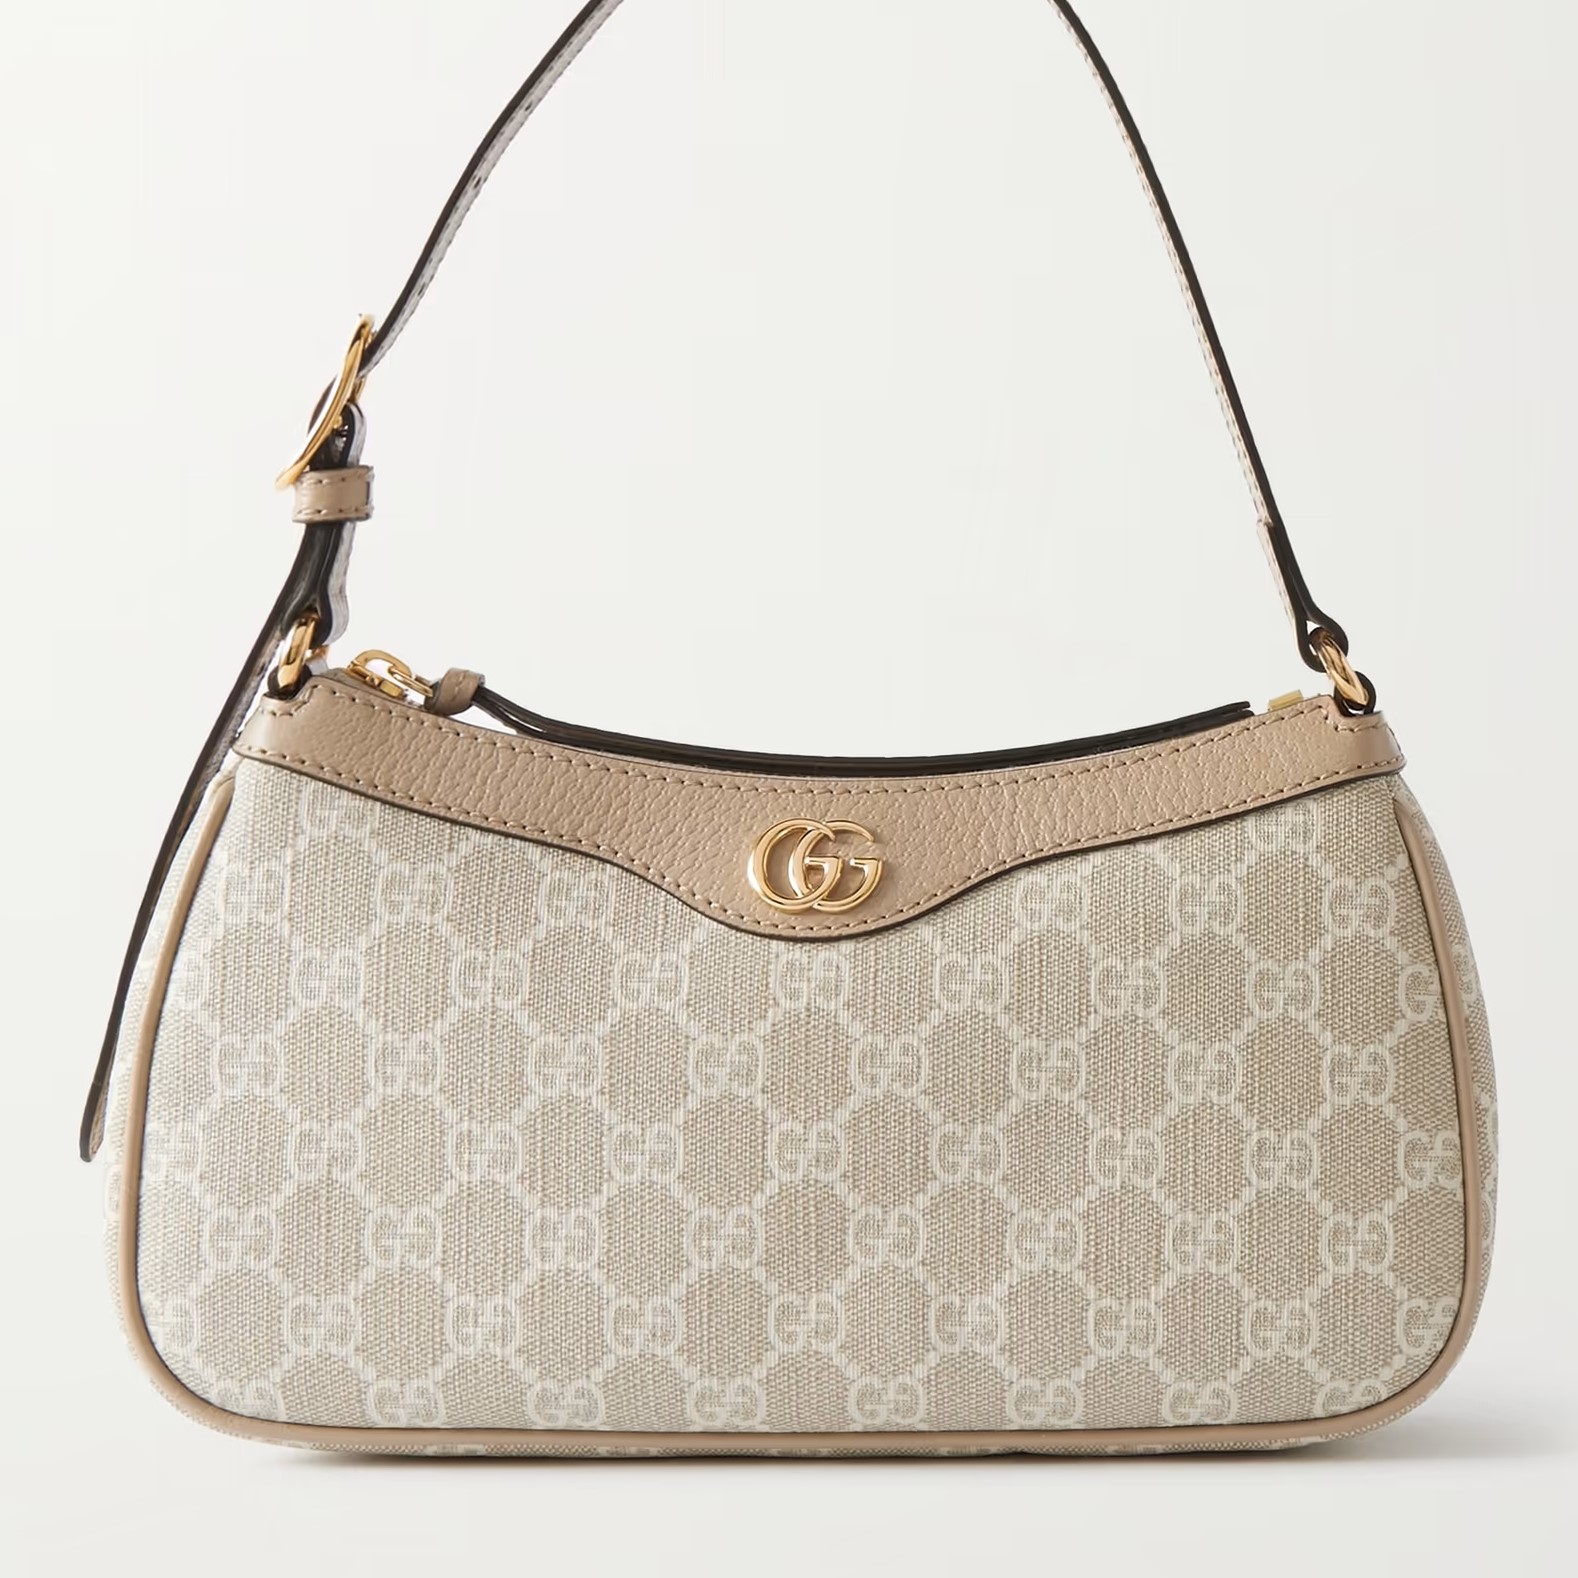 TÚI ĐEO VAI NỮ GUCCI OPHIDIA EMBELLISHED TEXTURED LEATHER TRIMMED PRINTED COATED CANVAS SHOULDER BAG 2